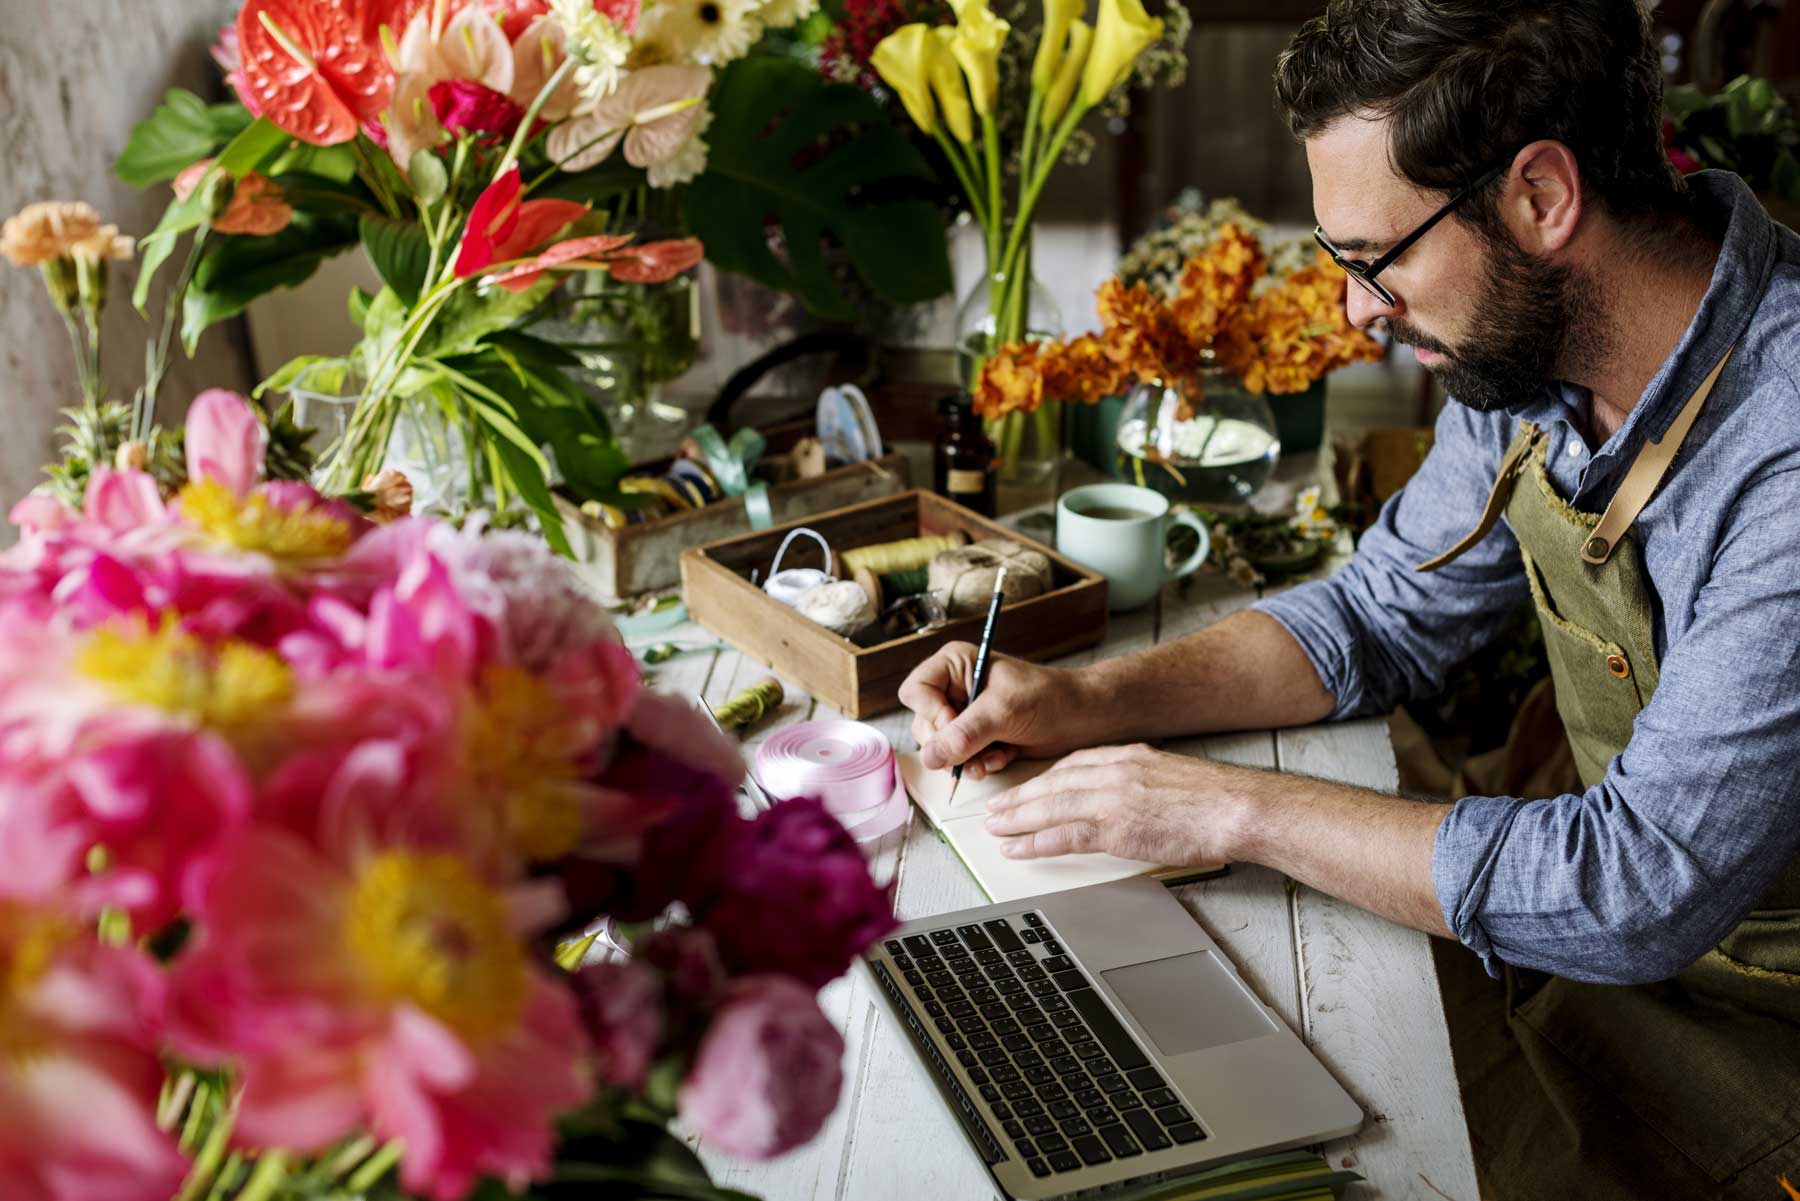 Man works on his e-commerce business in flower shop